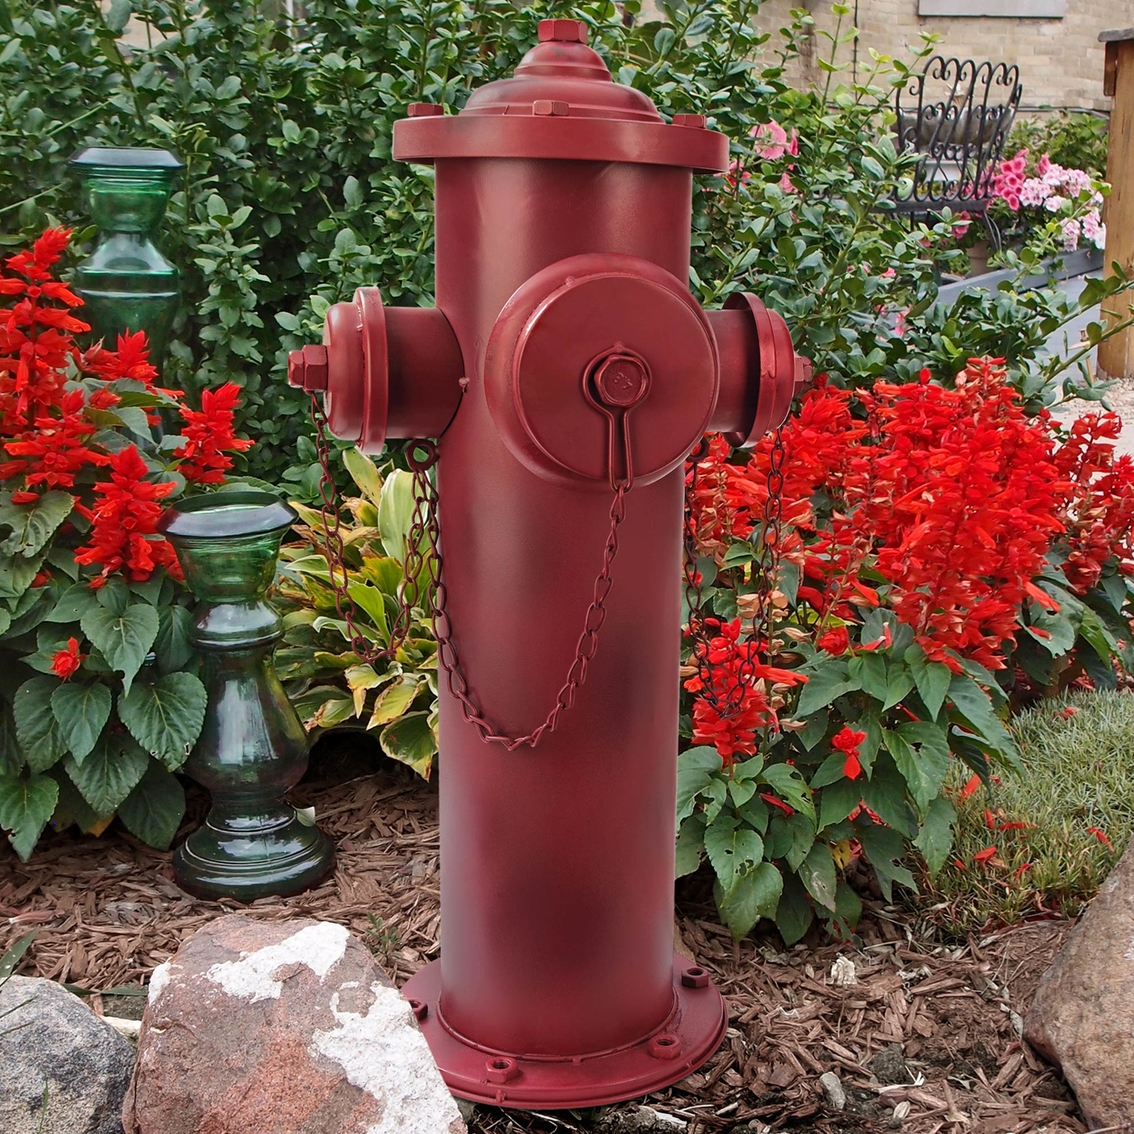 Design Toscano Vintage Fire Hydrant Statue - Image 4 of 4